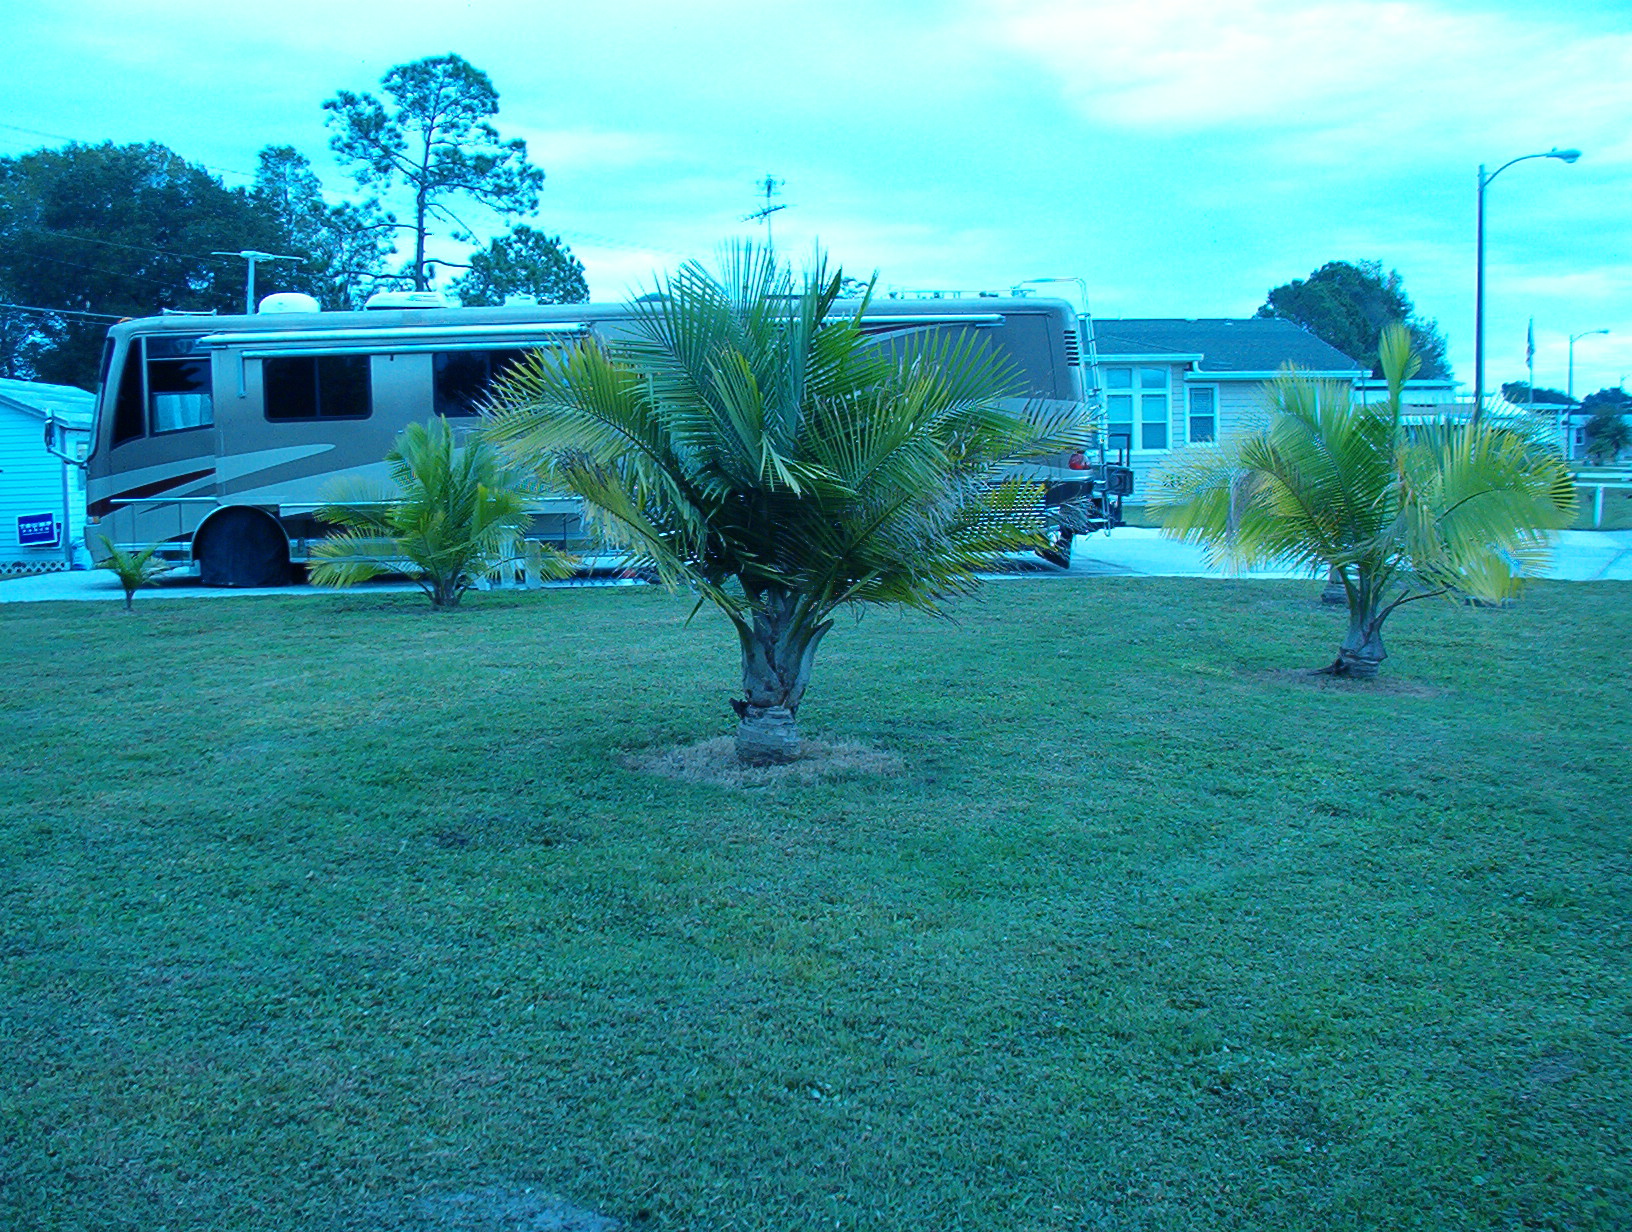 Florida Lots For Sale Page S-2 - RV Property RV Property